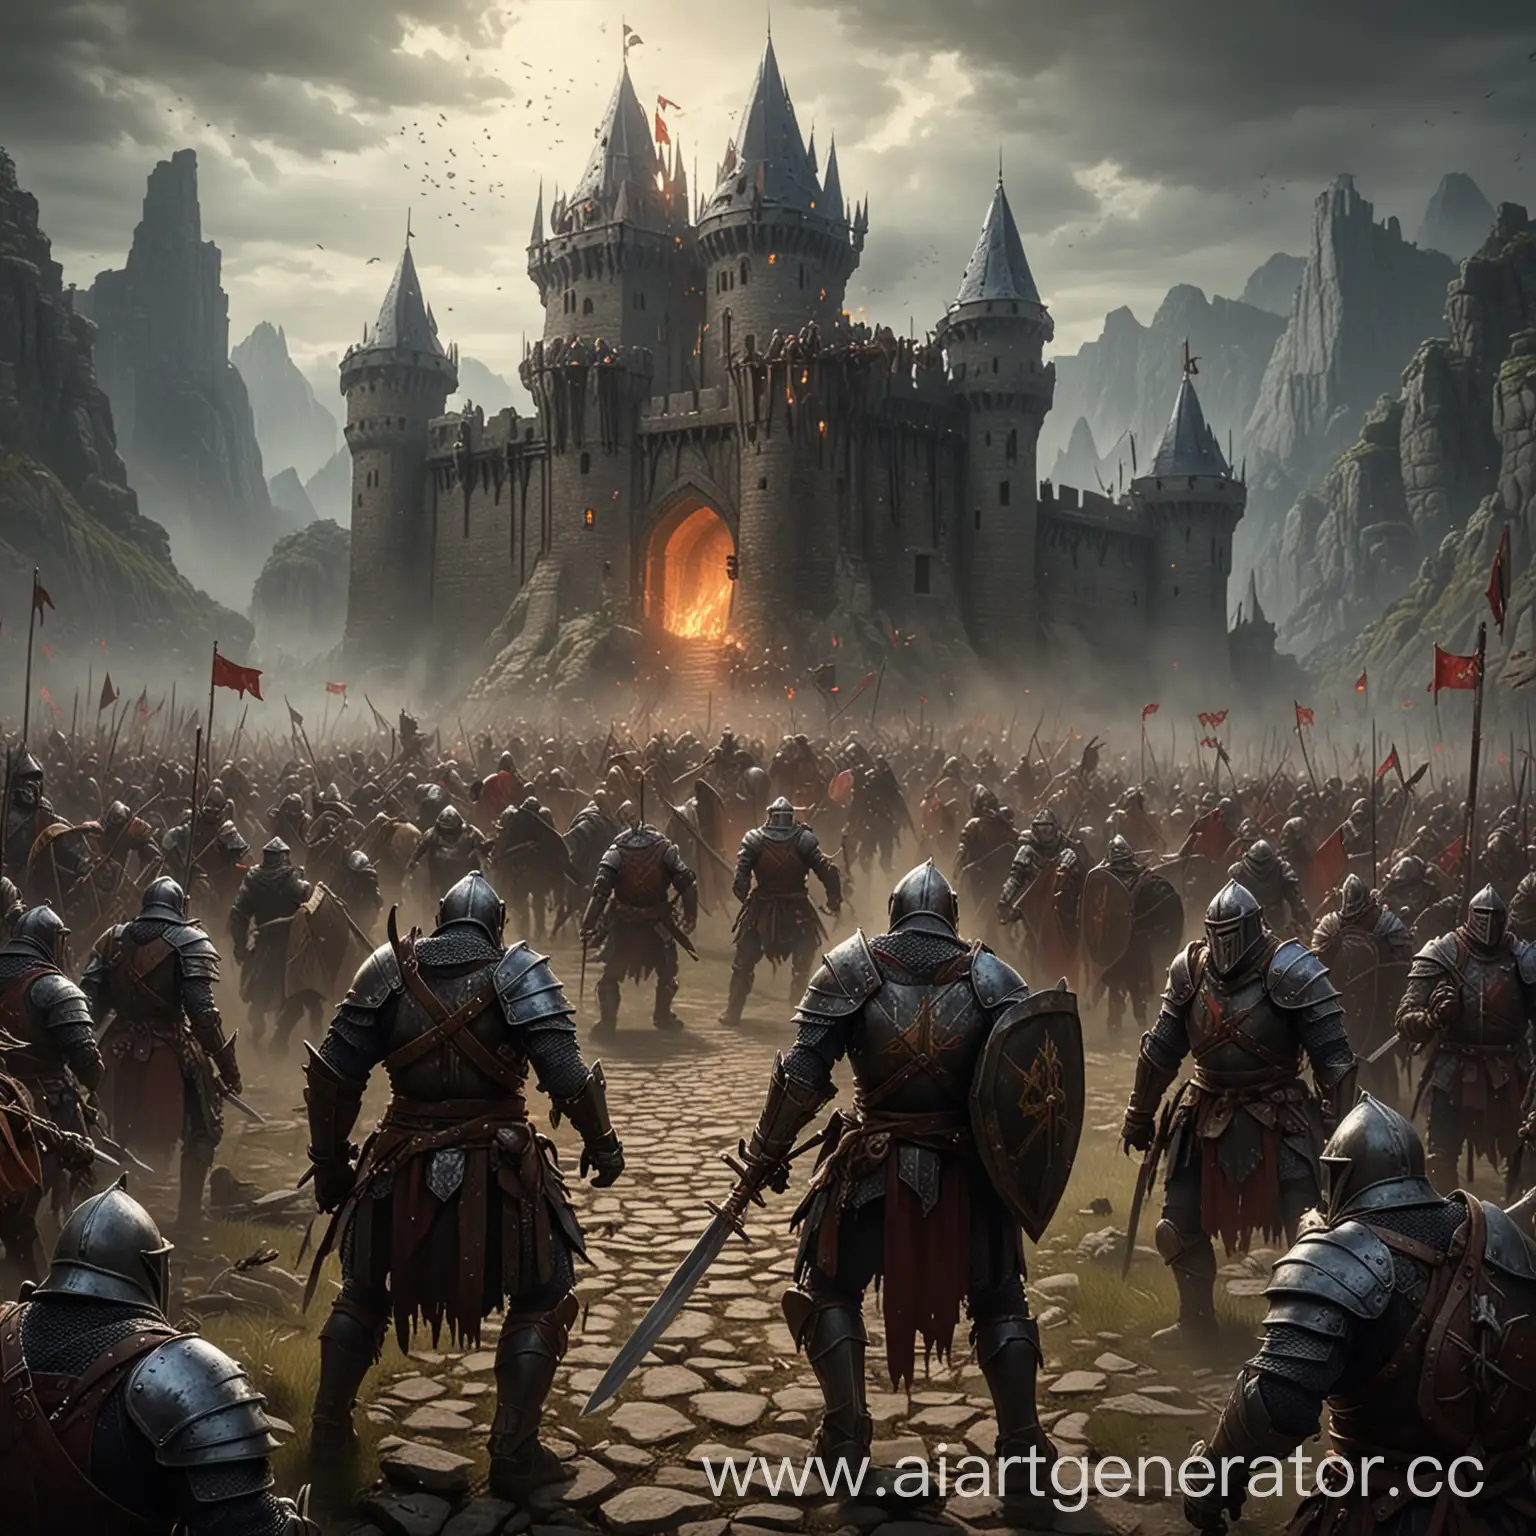 Knights-defending-the-castle-against-marauding-orcs